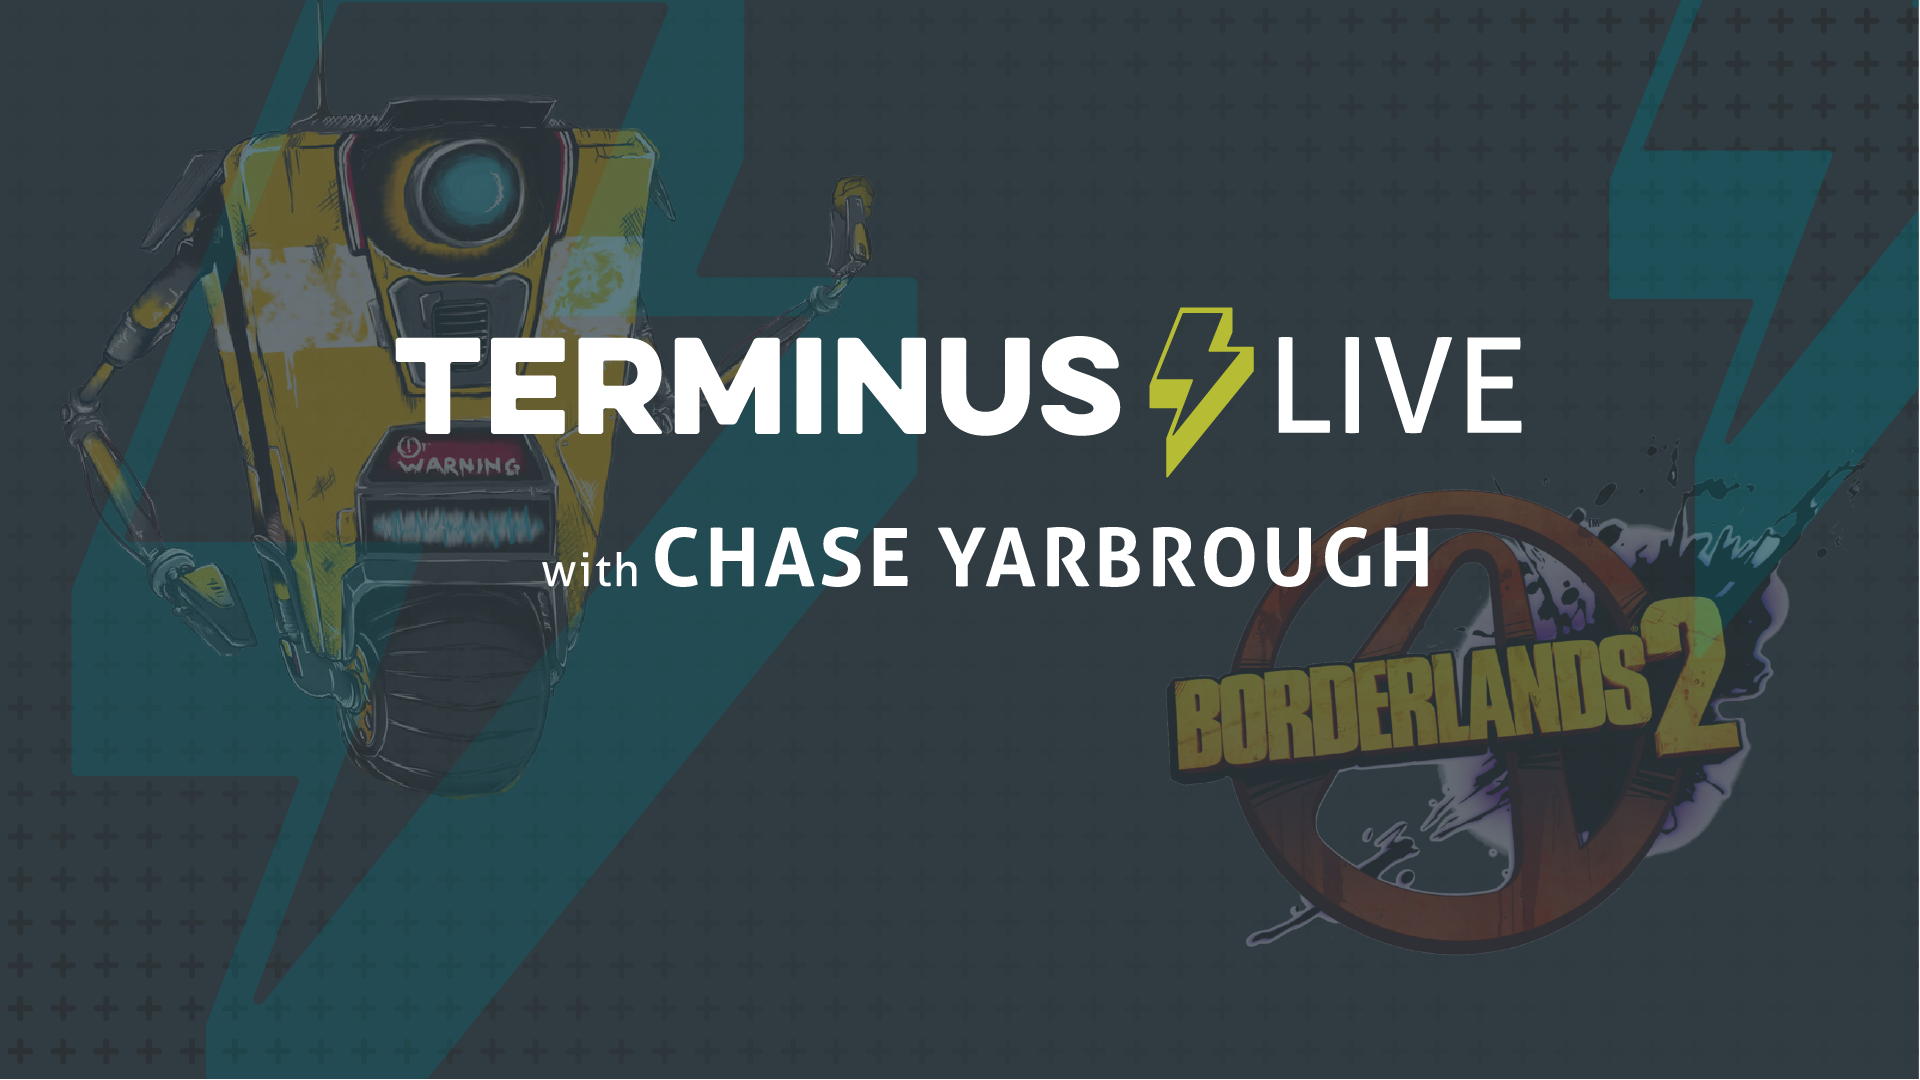 TERMINUS Live: Chase Yarbrough plays Borderlands 2